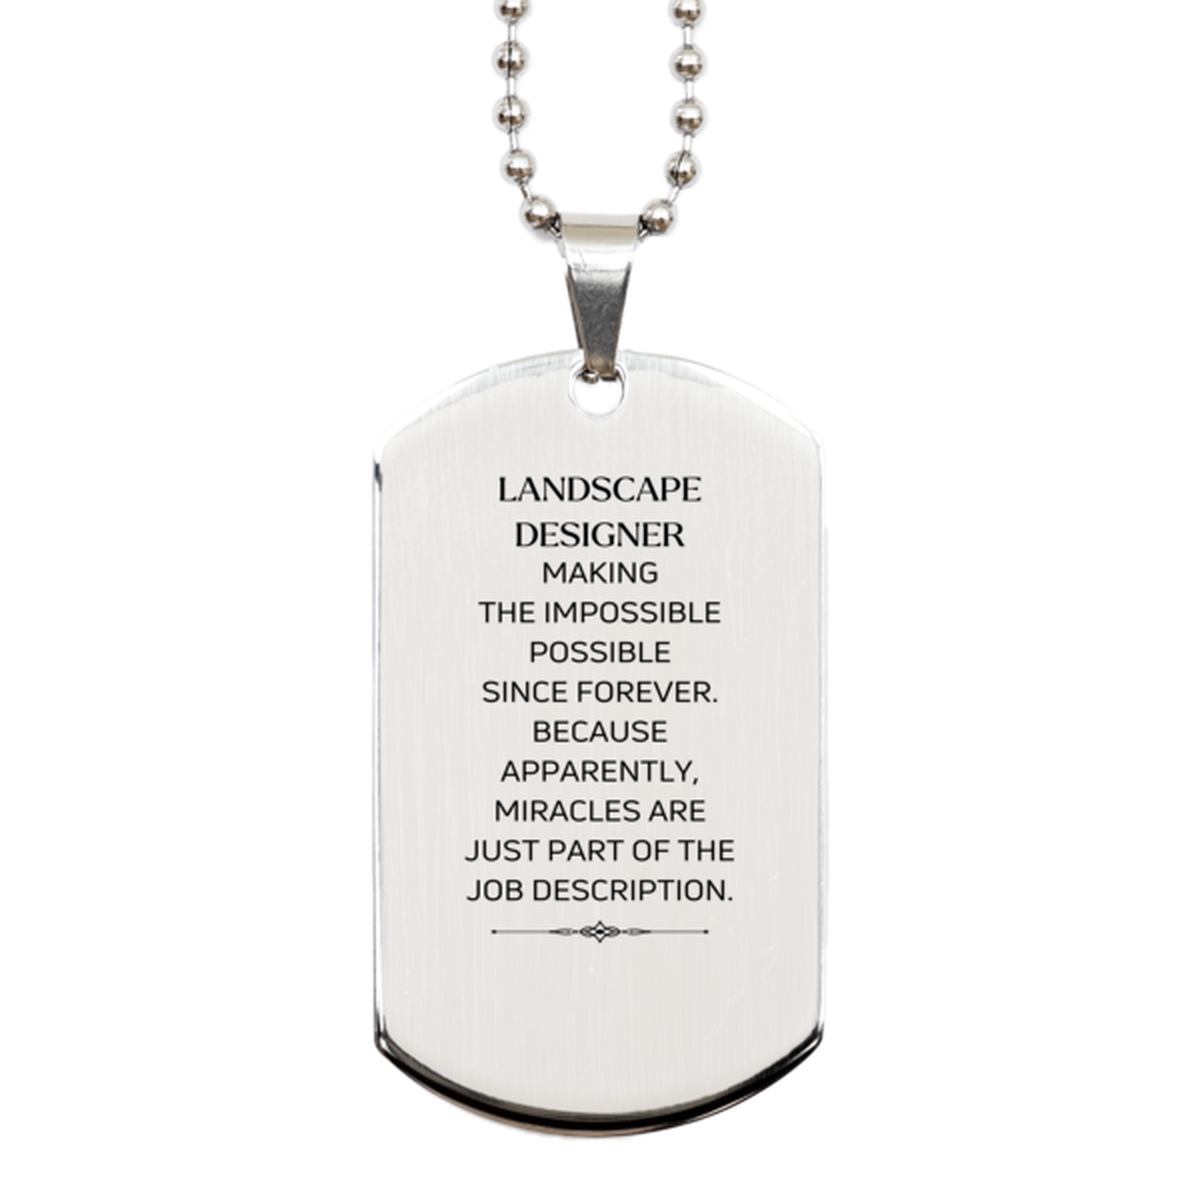 Funny Landscape Designer Gifts, Miracles are just part of the job description, Inspirational Birthday Silver Dog Tag For Landscape Designer, Men, Women, Coworkers, Friends, Boss